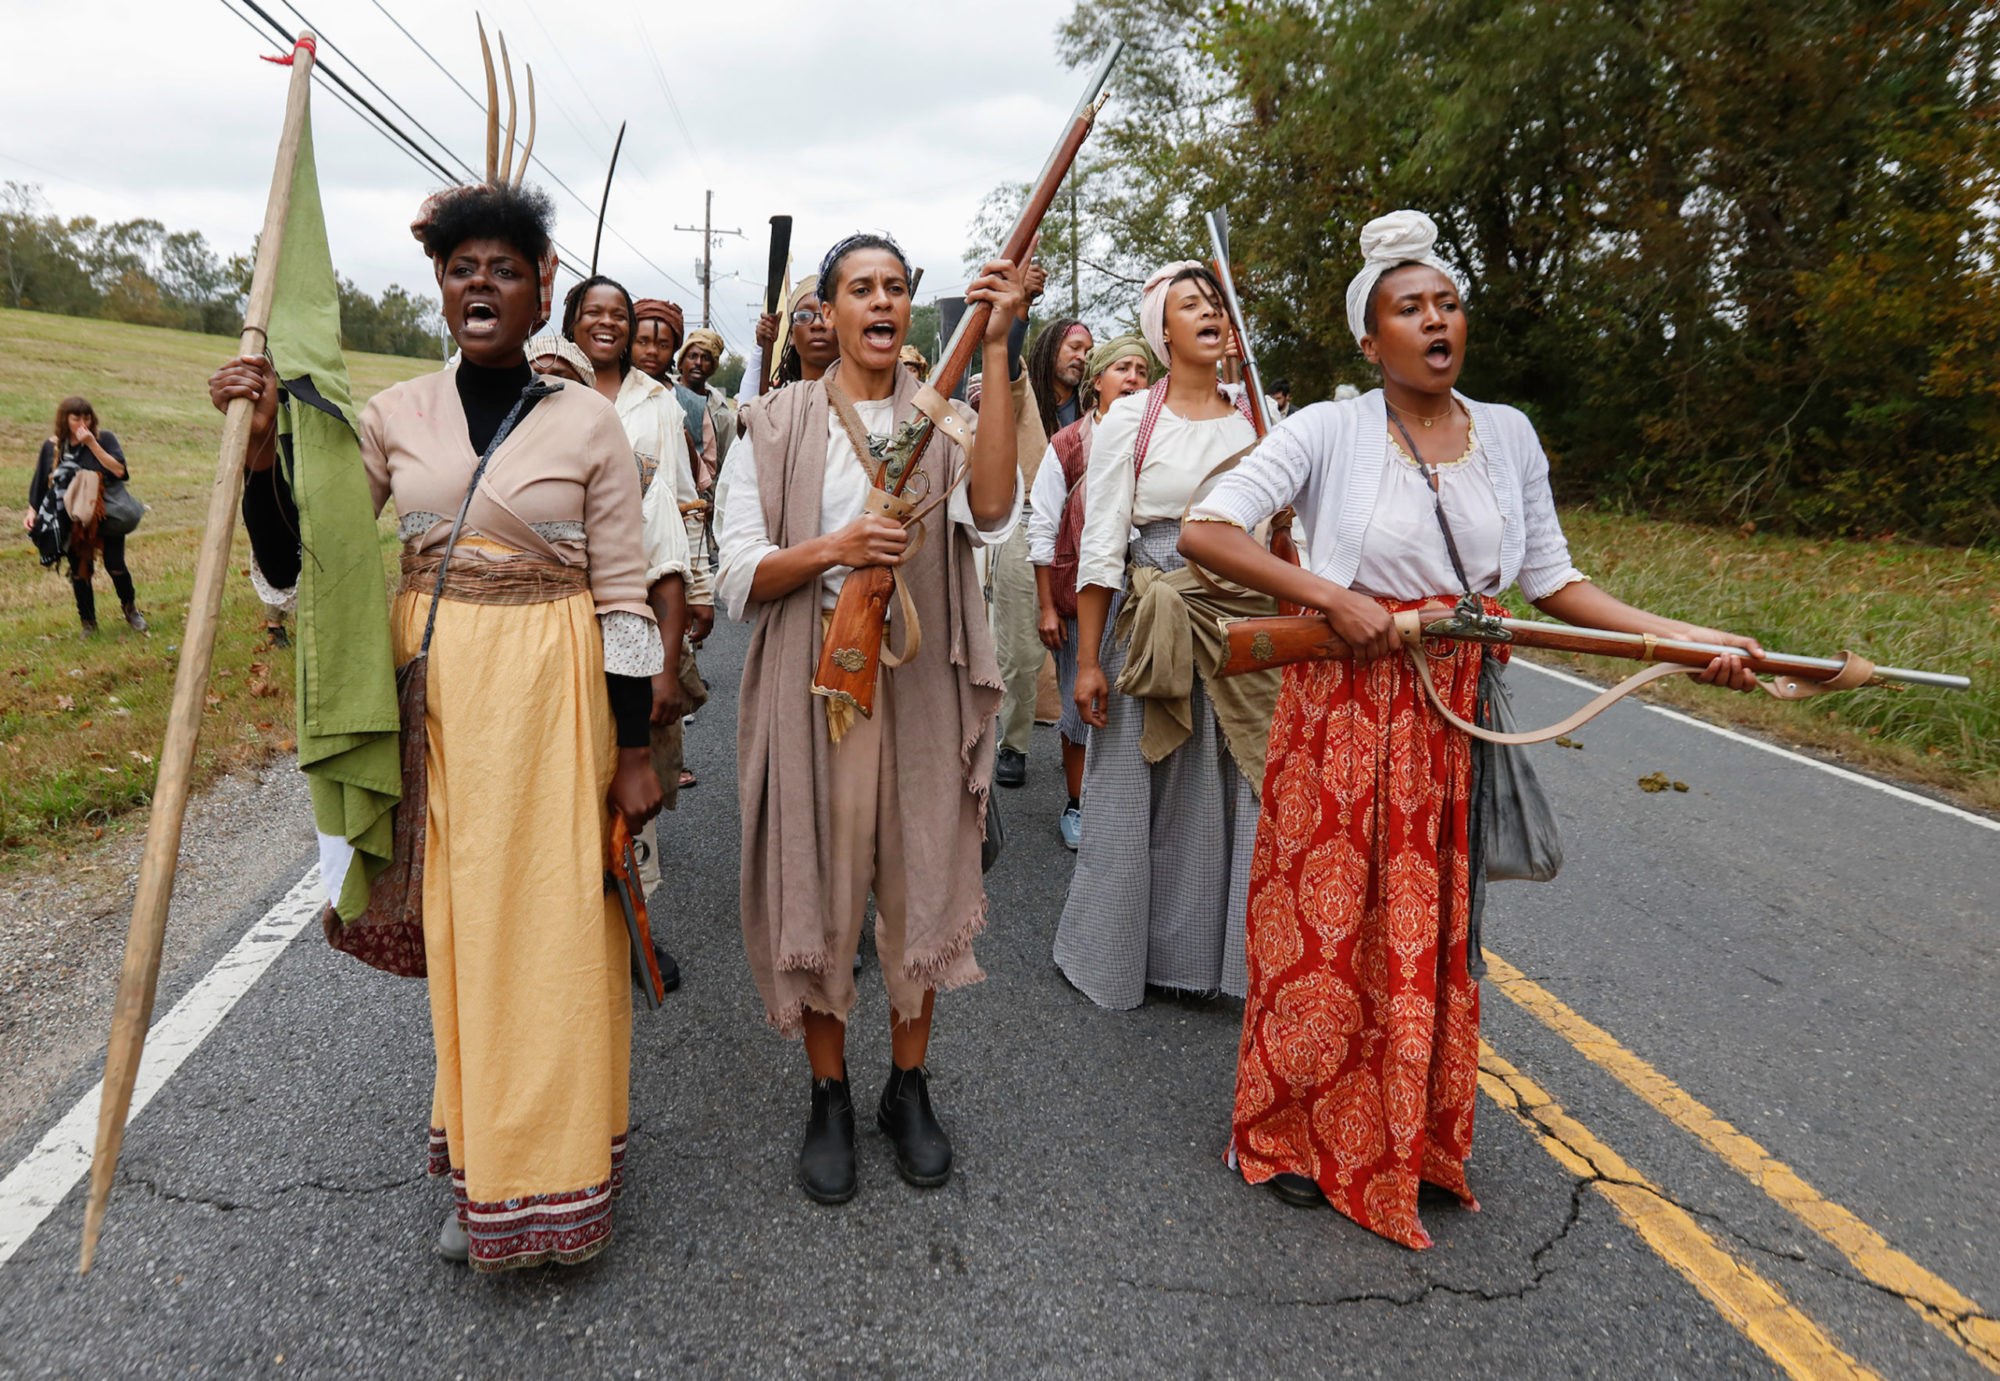 Documentation of the Slave Rebellion Reenactment, a community engaged performance initiated by Dread Scott in the outskirts of New Orleans